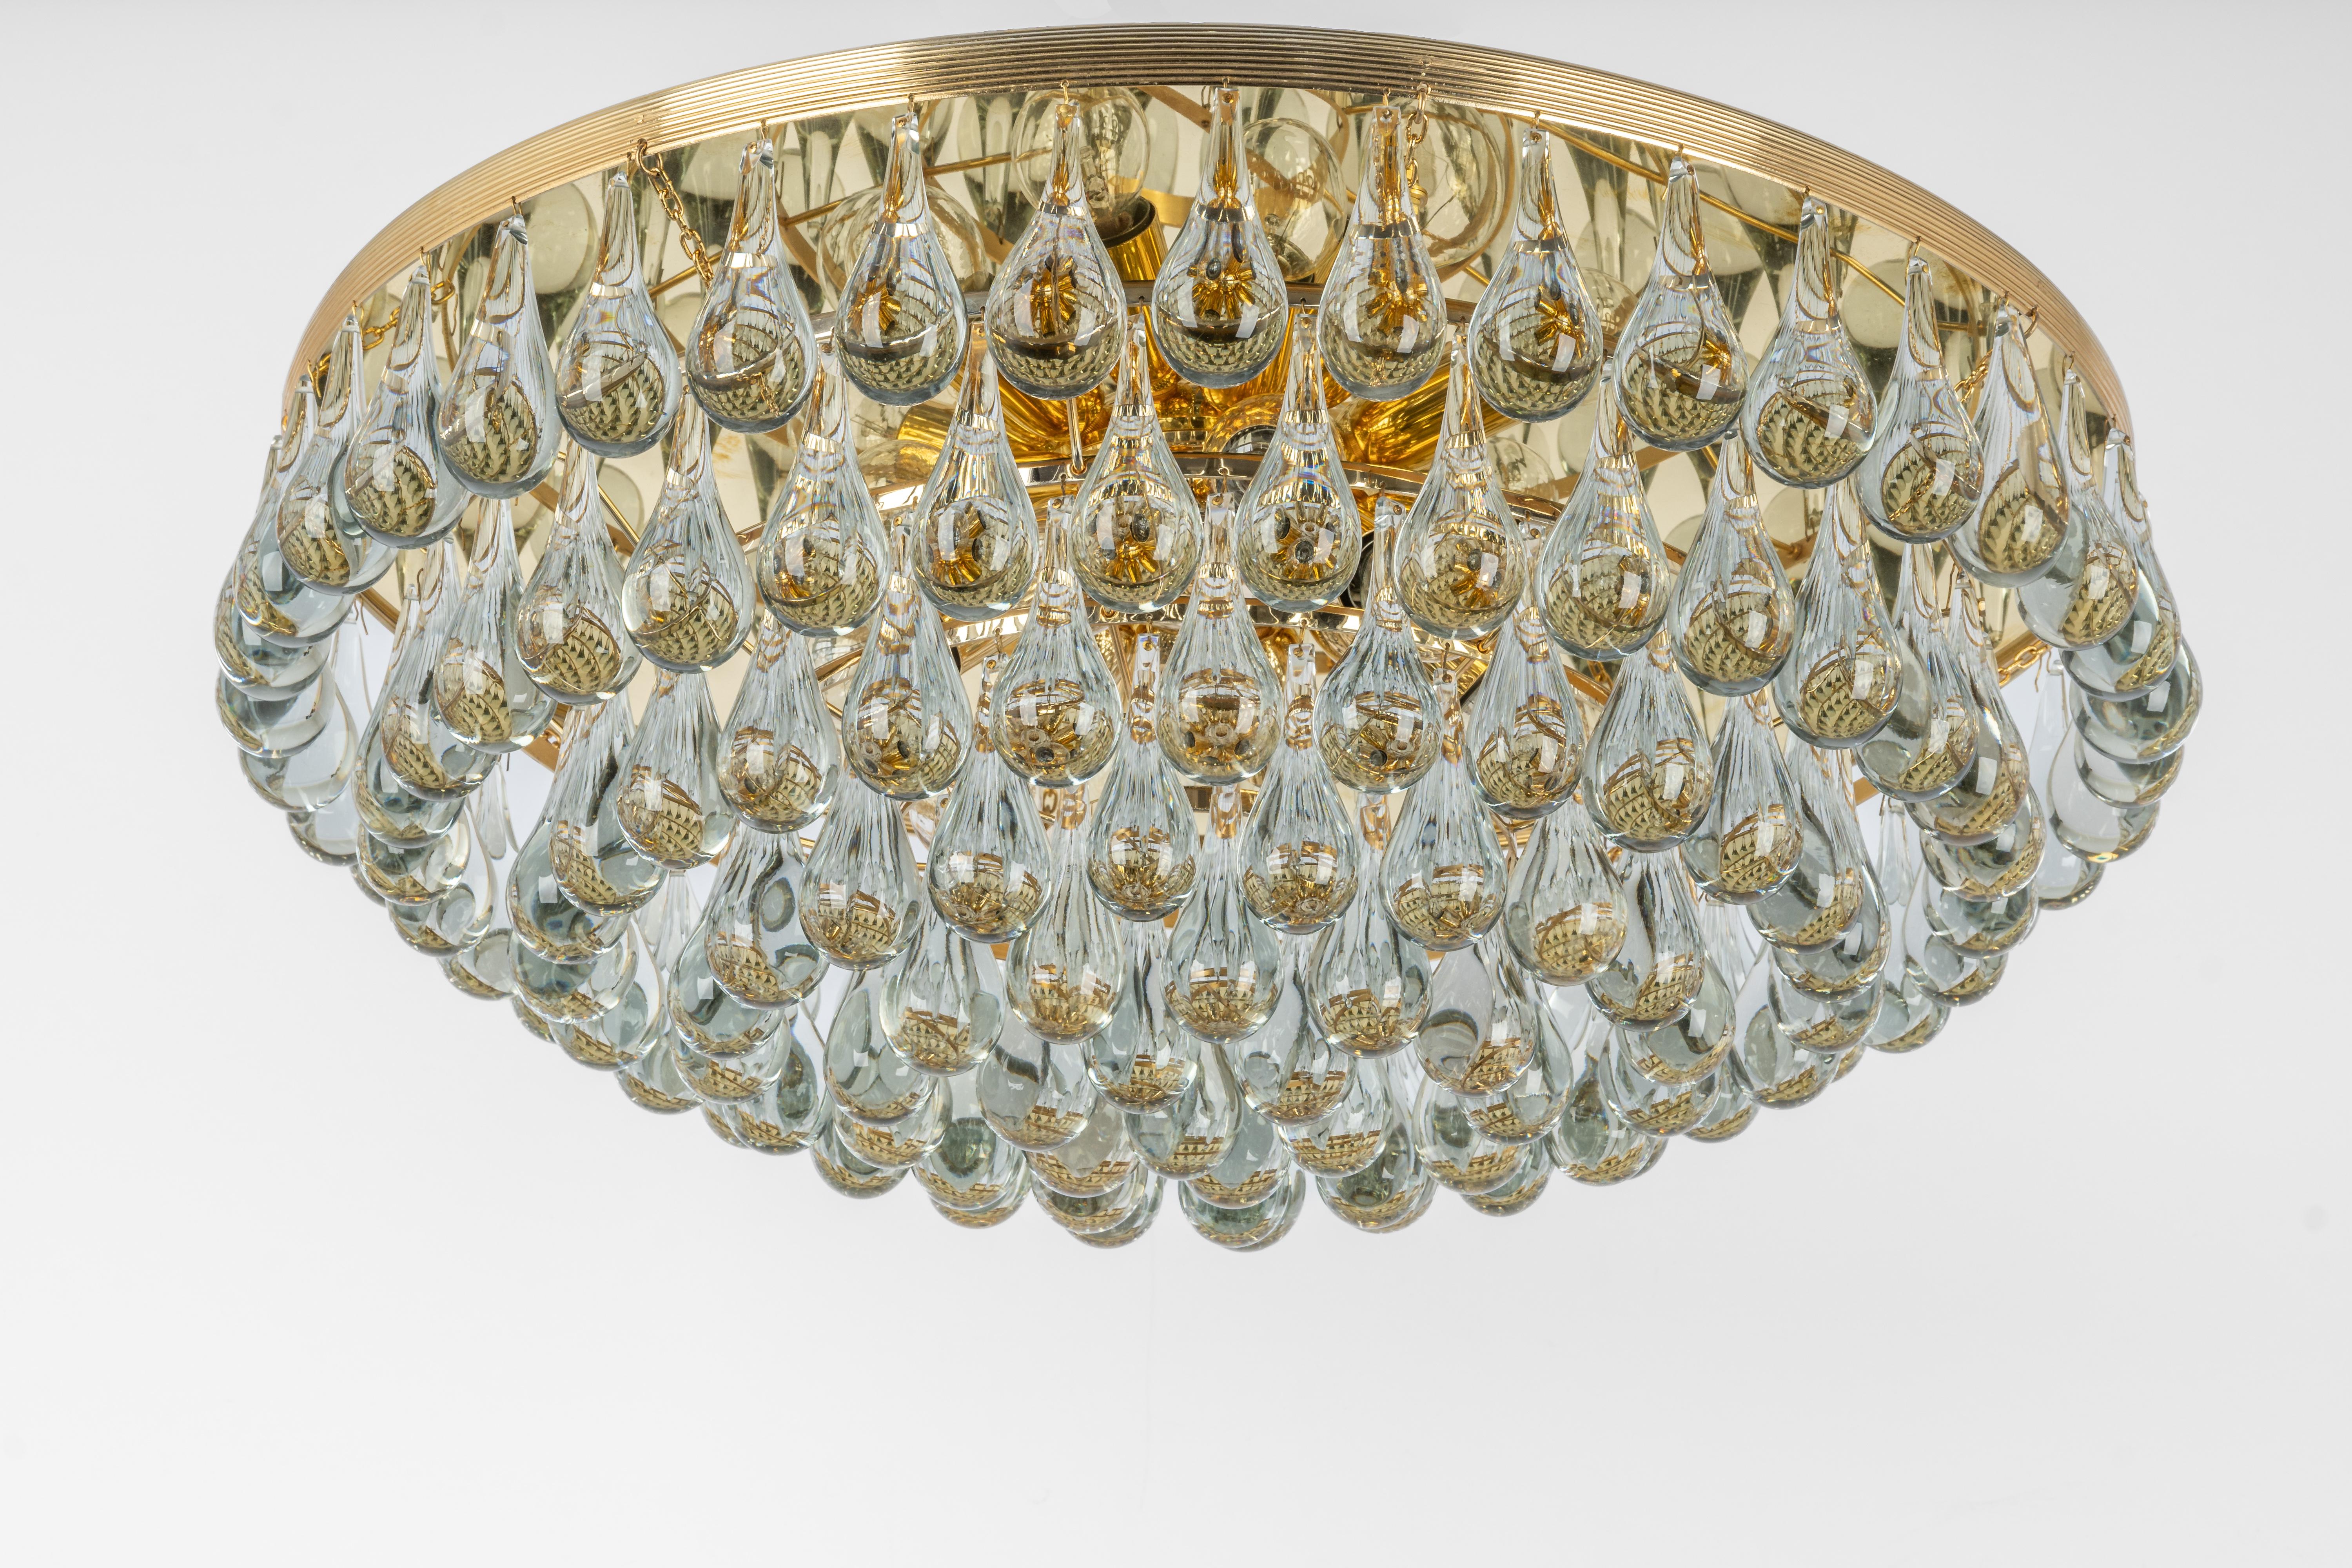 1 of 3 Large Murano Glass Tear Drop Chandelier by C.Palme, Germany, 1970s For Sale 6